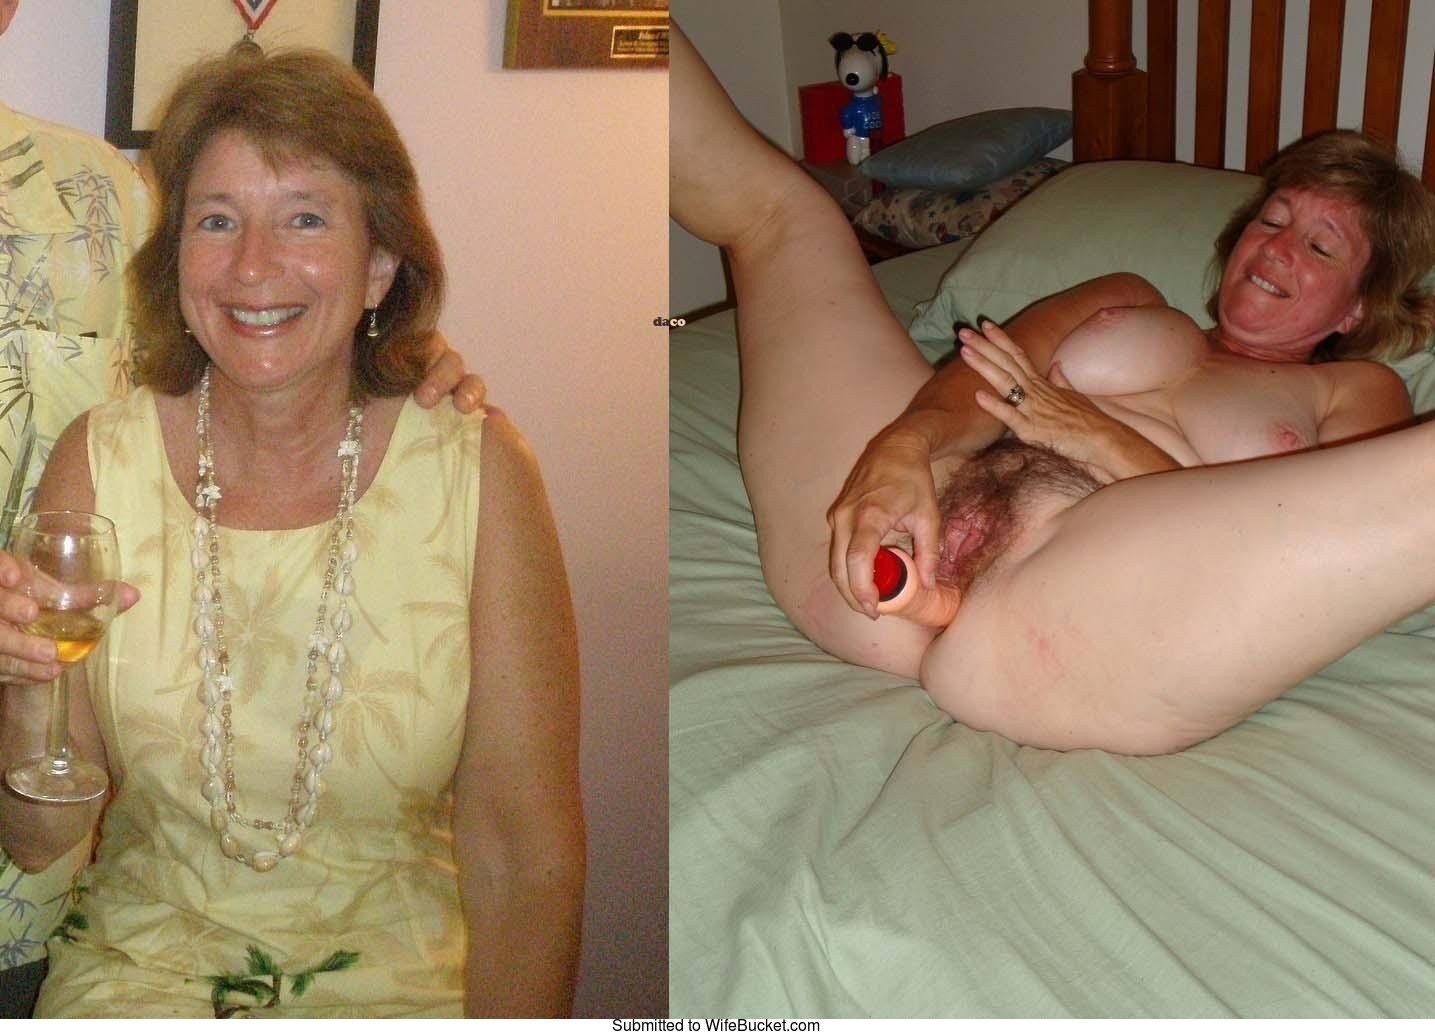 Porn Grannies Dressed and Naked (56 photos)